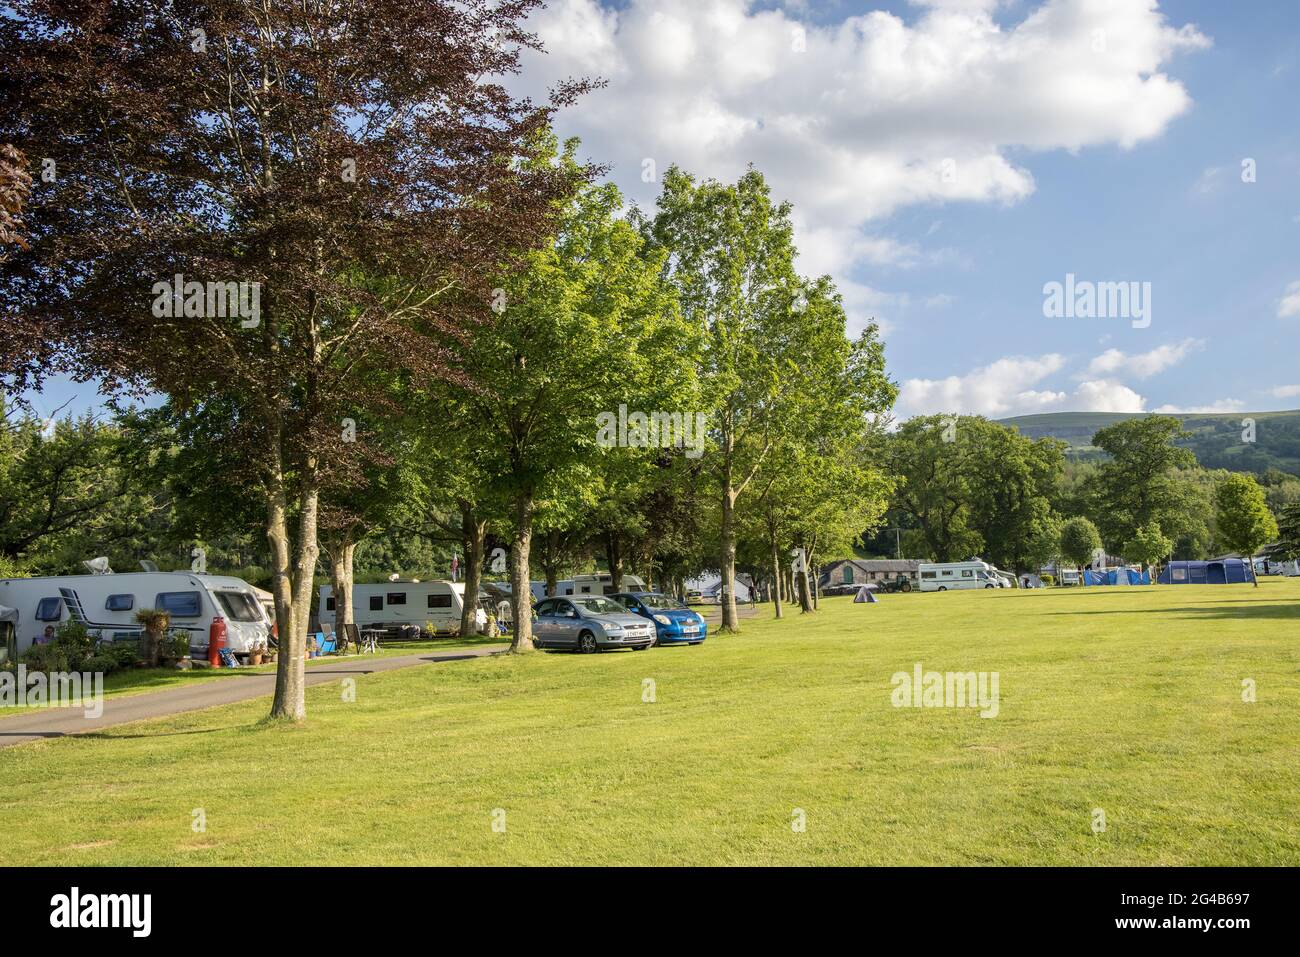 Large open field used for camping, Llangattock, Wales, UK Stock Photo